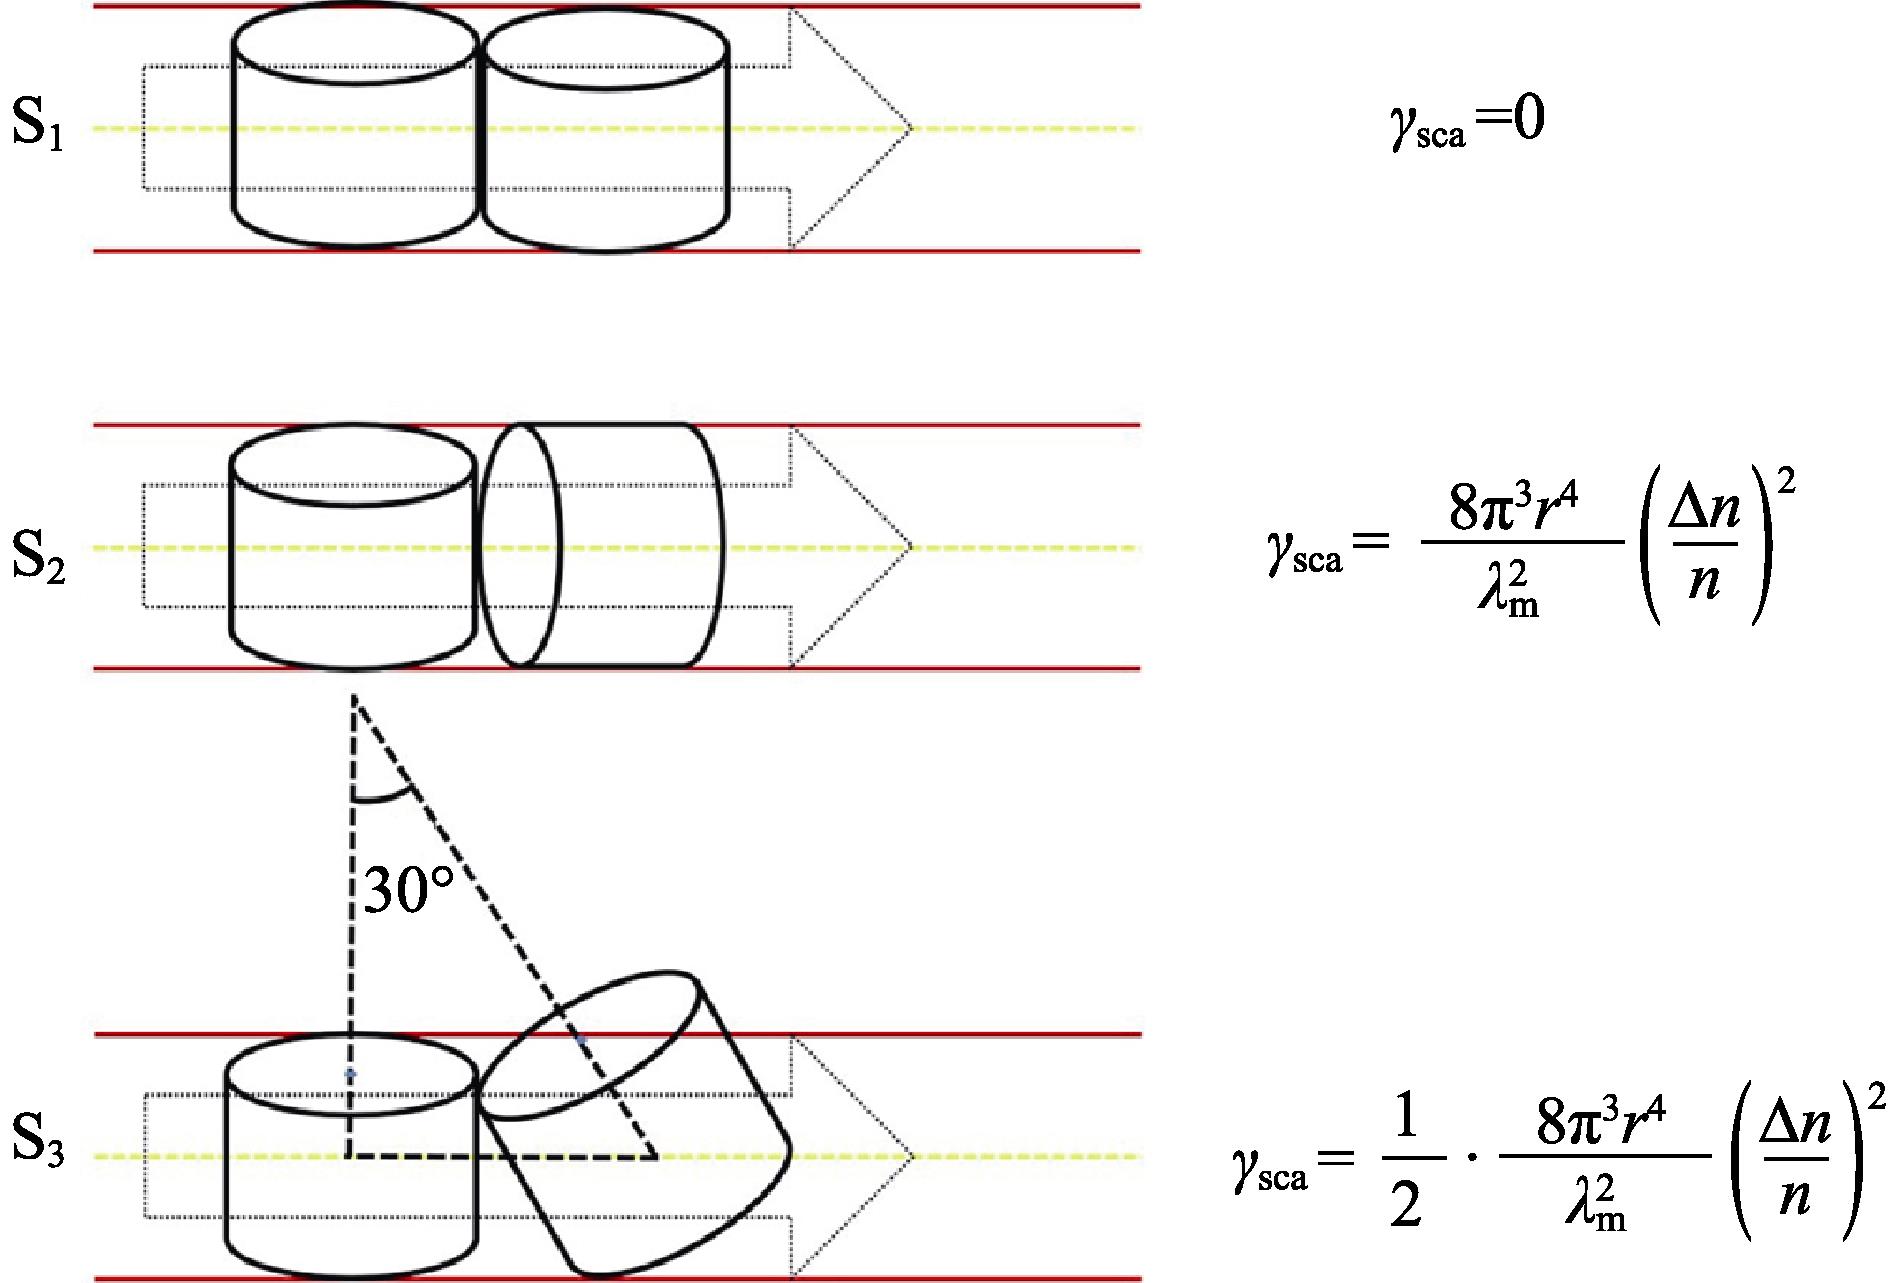 Three special situations in simplified model of light transmission through intergranular